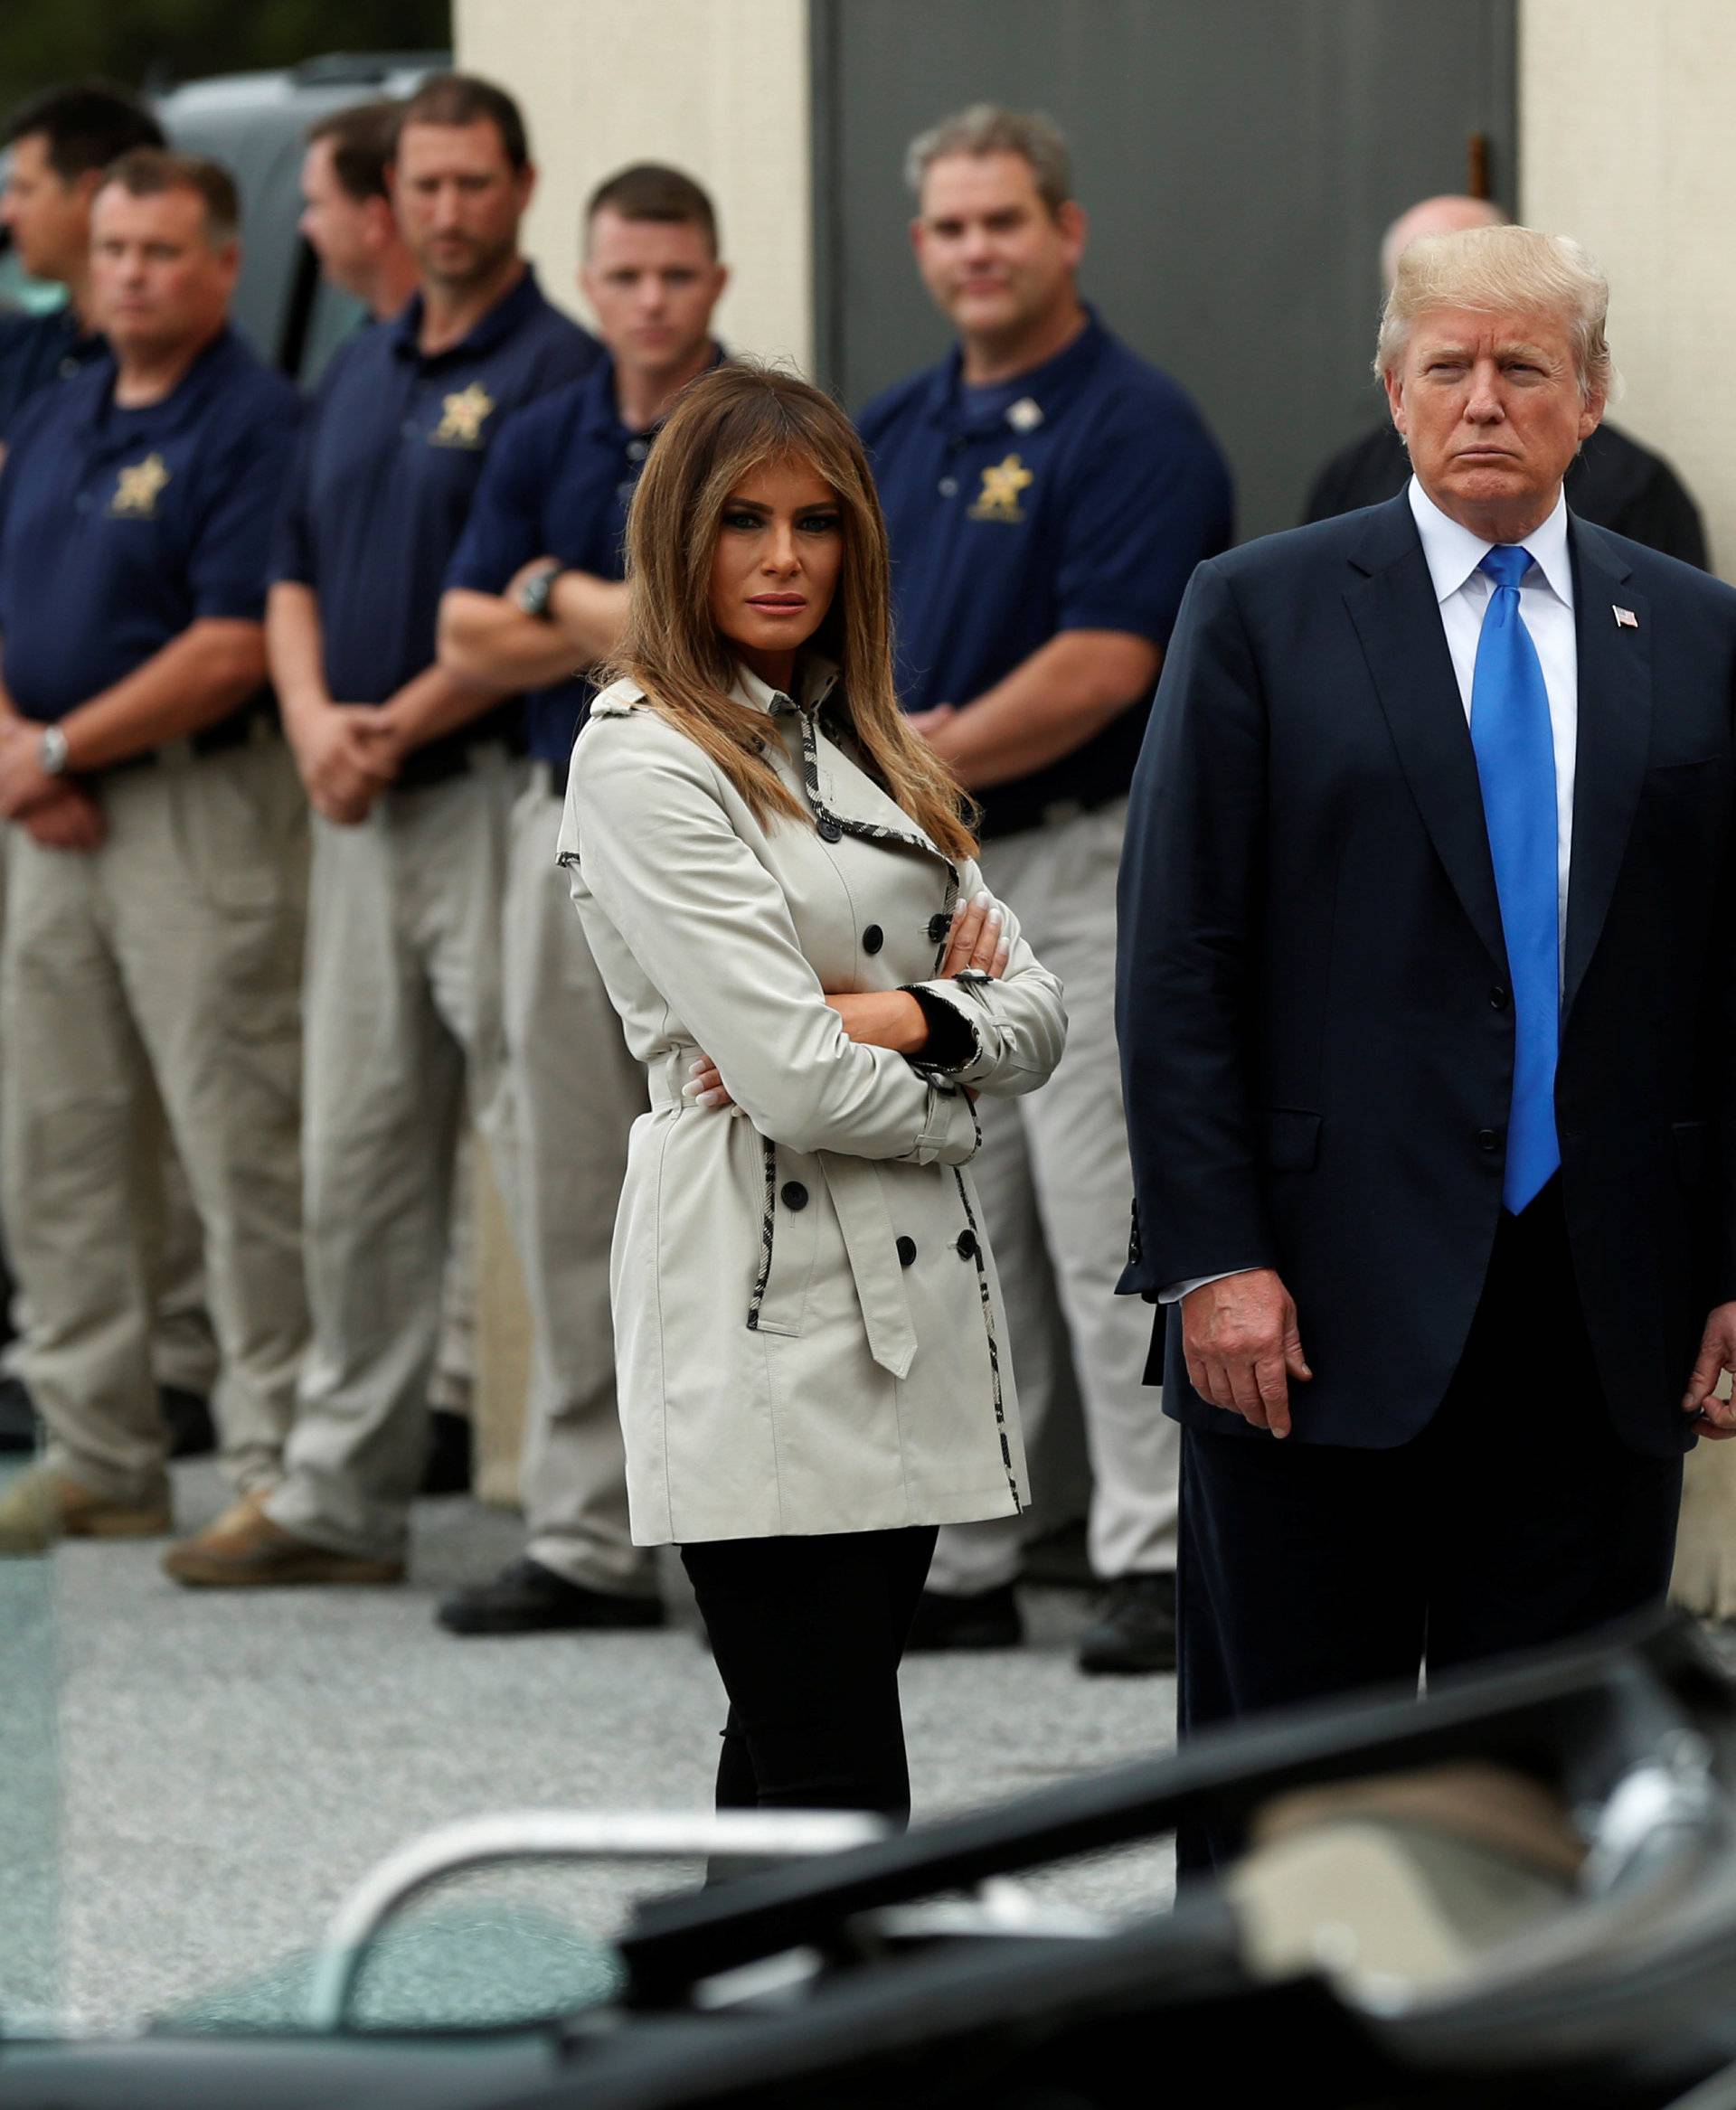 President Donald Trump and First Lady Melania Trump tour the Secret Service training facility in Beltsville